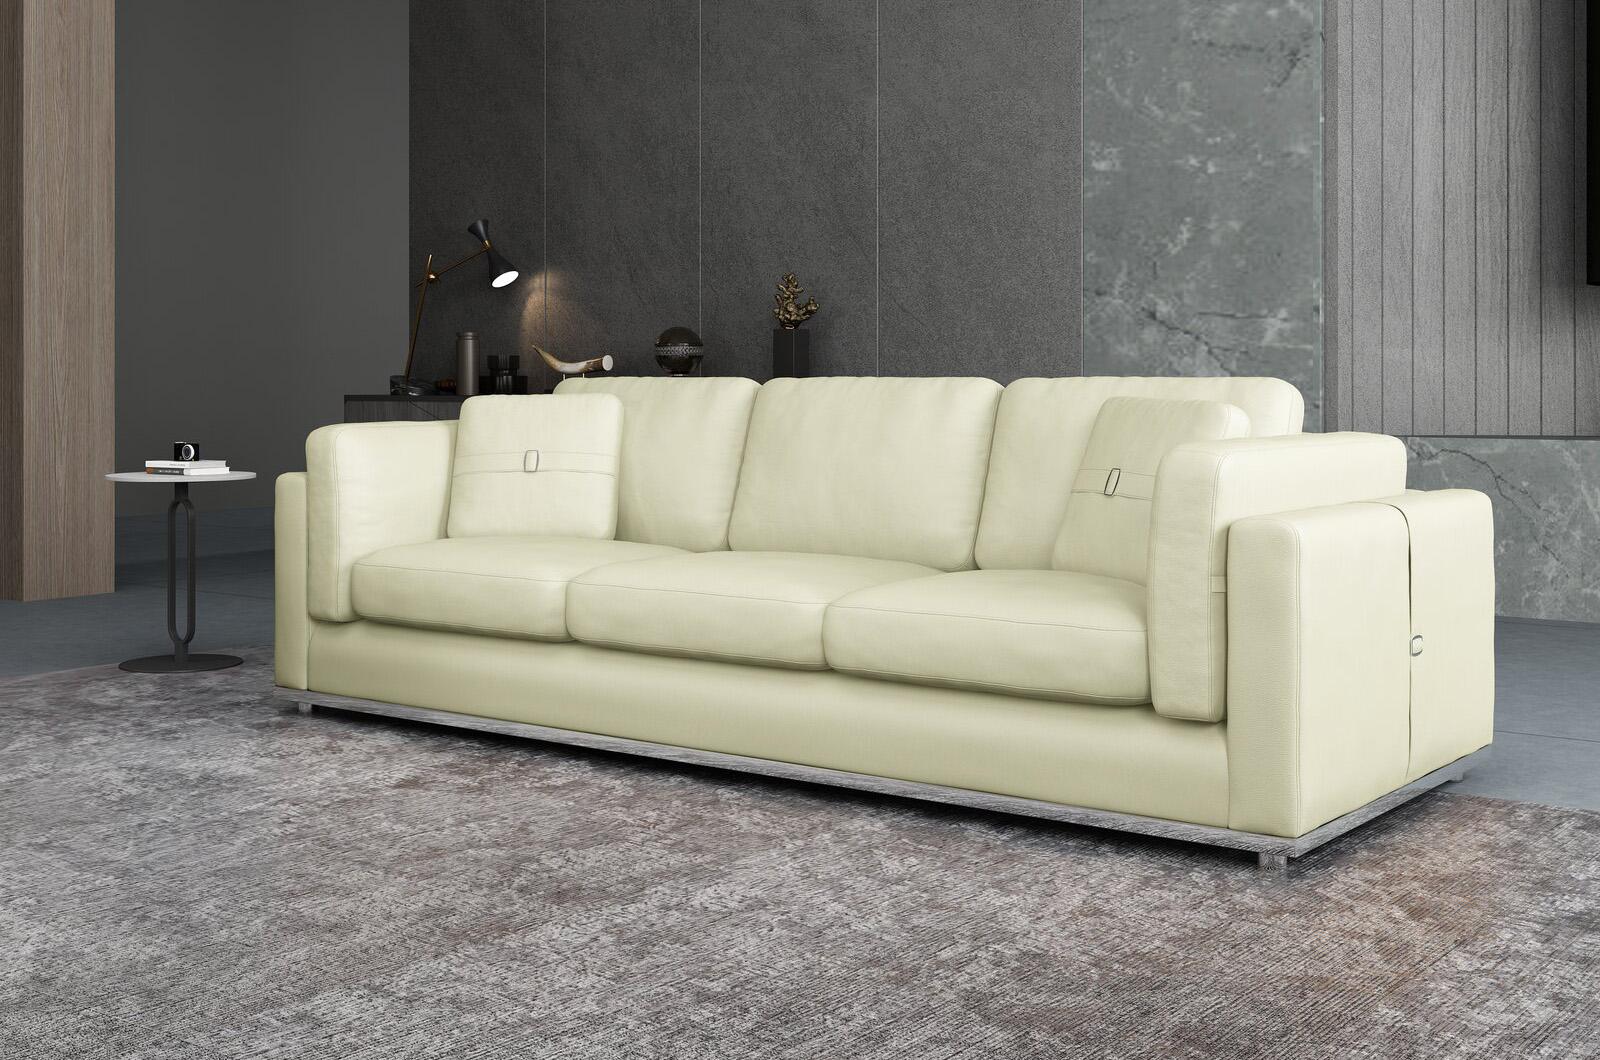 Contemporary, Modern Sofa PICASSO EF-25551-S in Off-White Leather